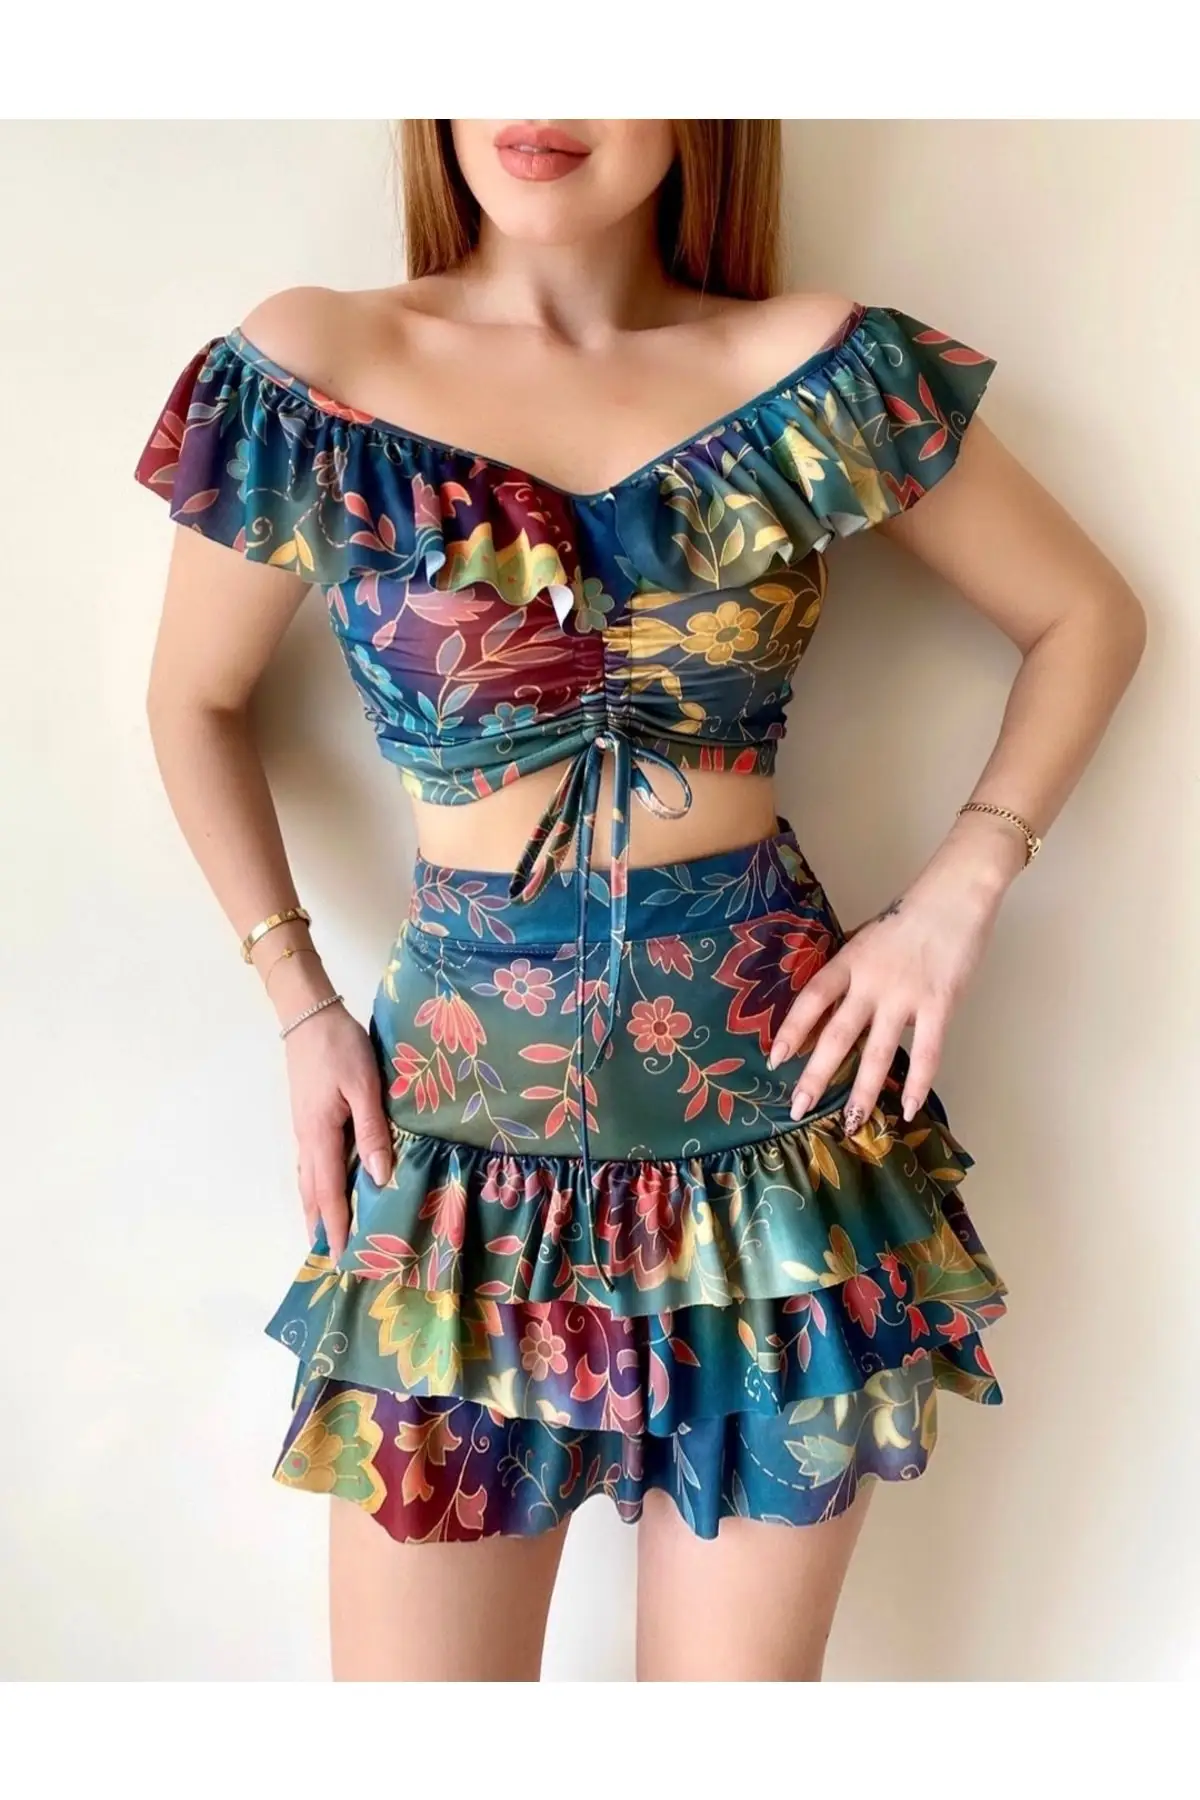 

Flexible Fabric Shad Detailed Tropical Patterned Bustier And Coat High Waist Skirt Suit 019 Floral Zero Arm Mini Night